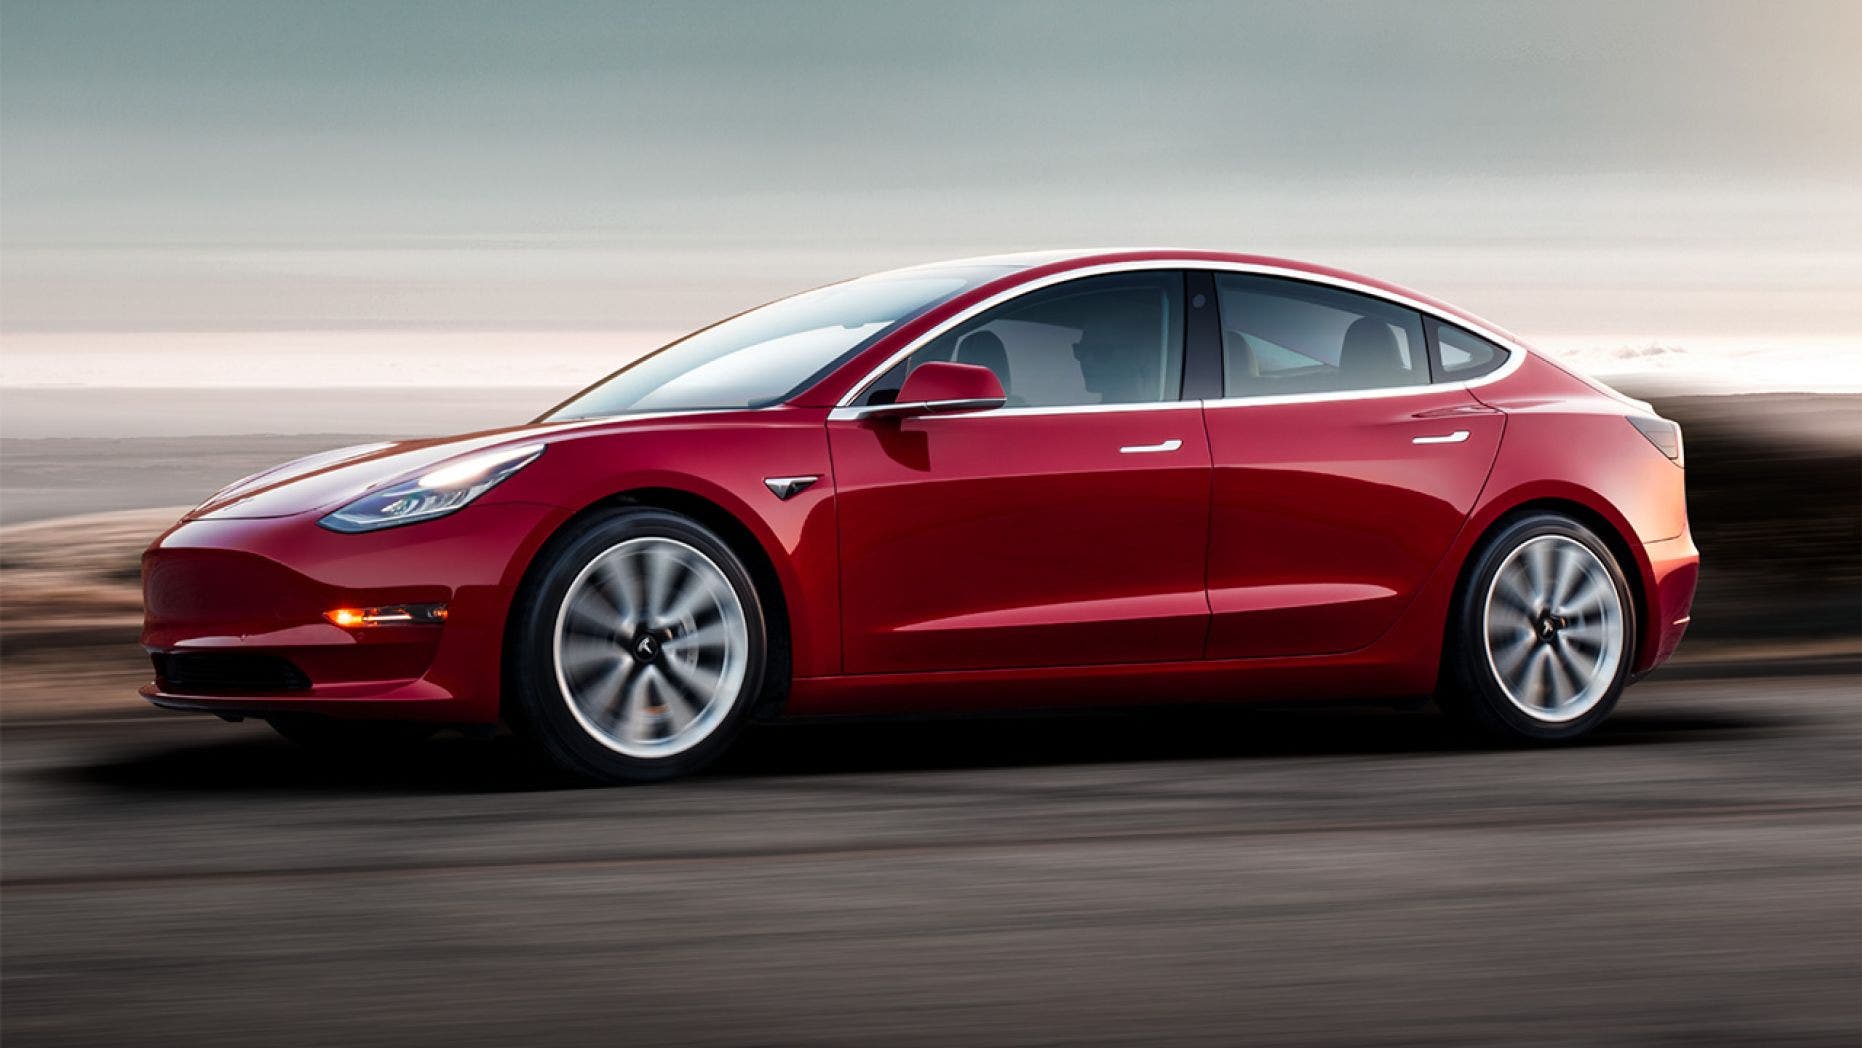 Cheapest Tesla gets 1,000 price increase after less than a week Fox News